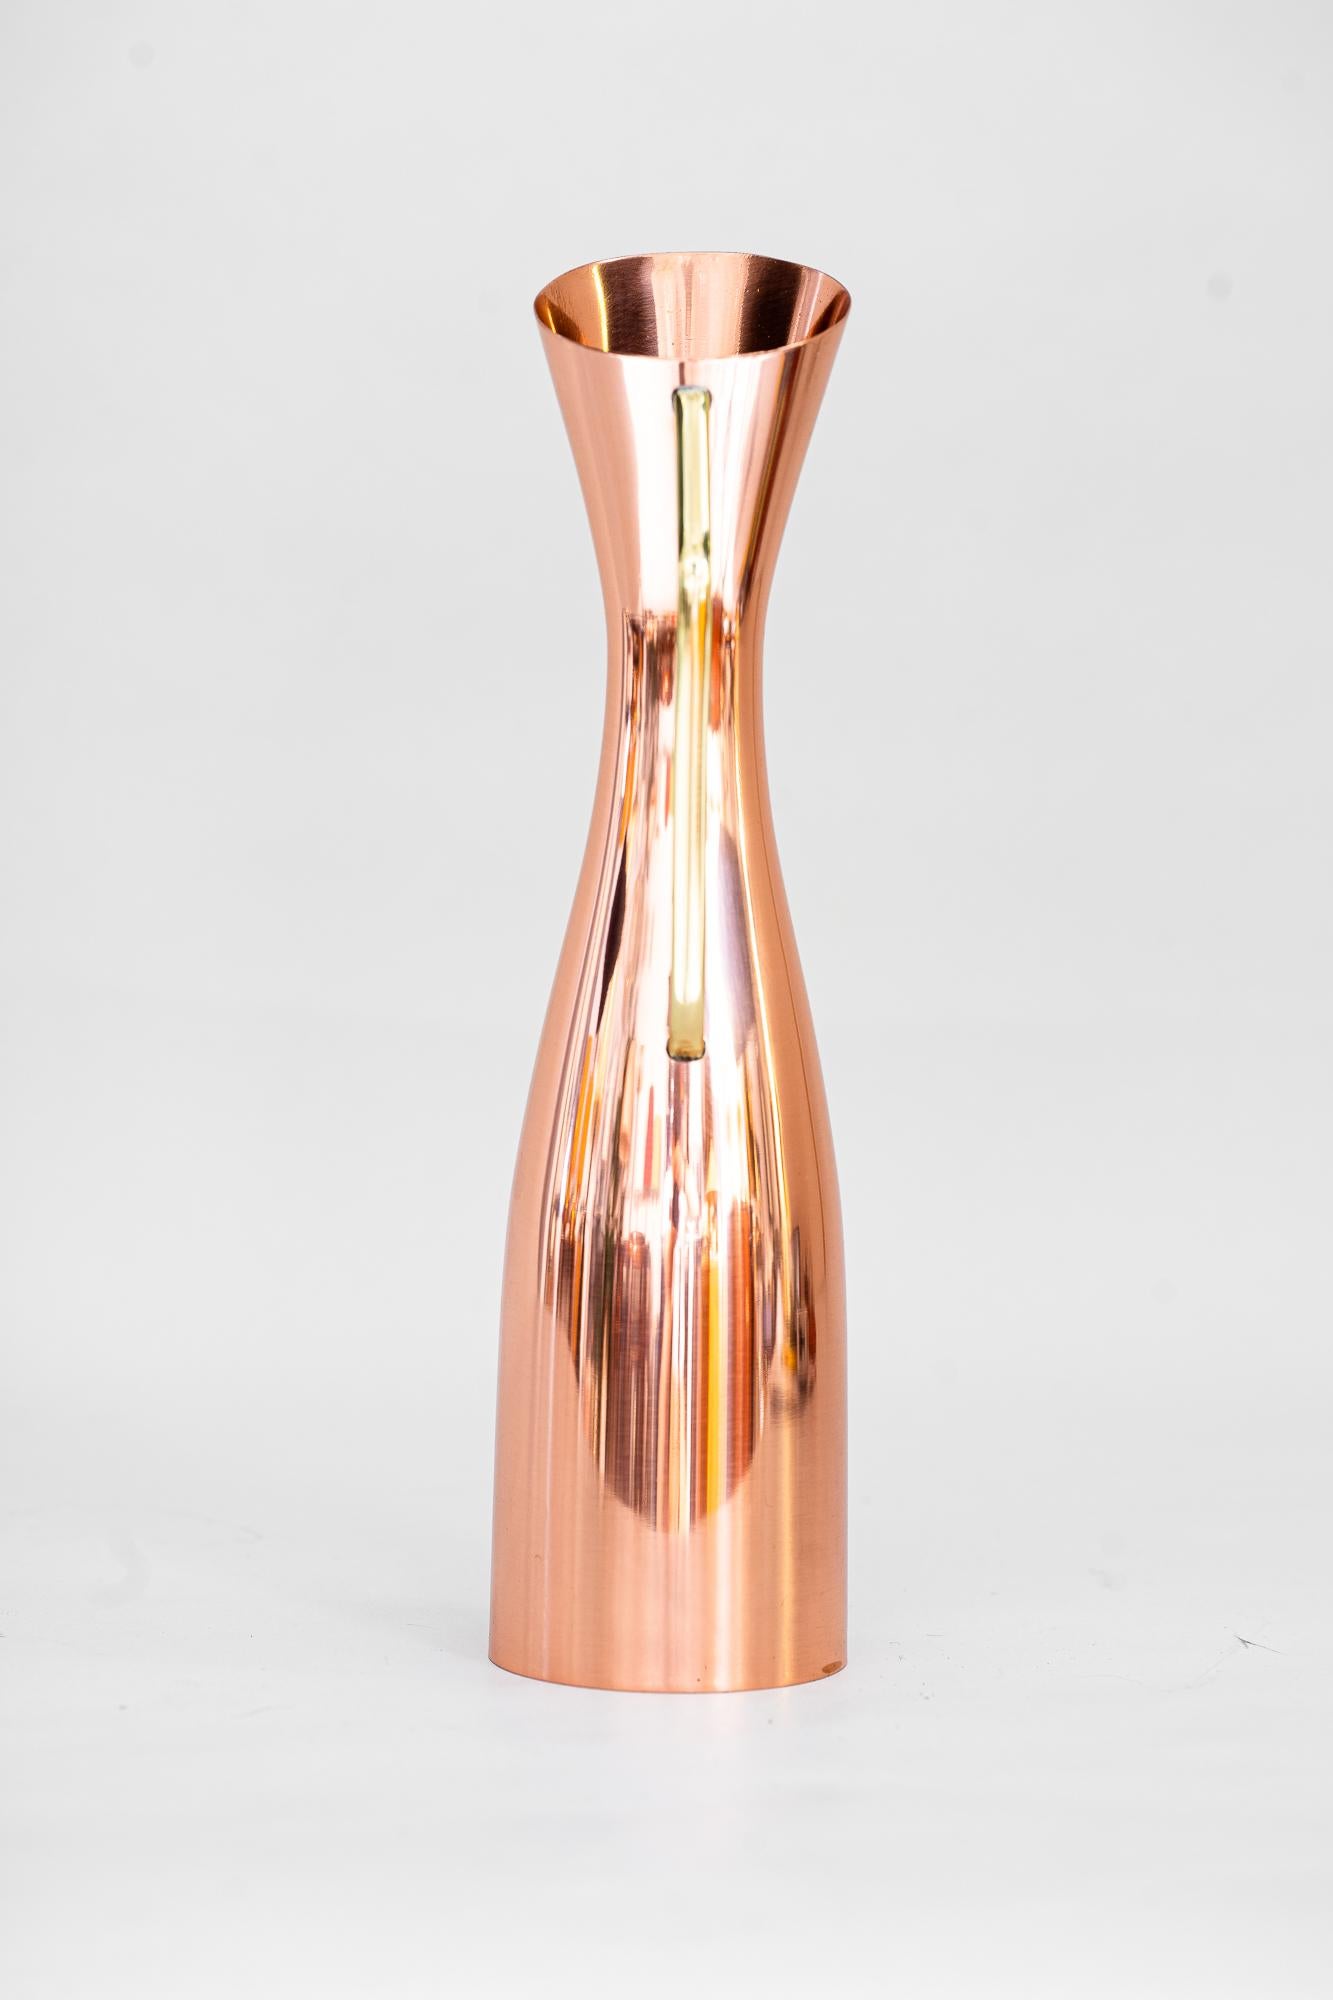 Polished Flower Vase or Can Copper Brass Conbination Vienna Around 1950s For Sale